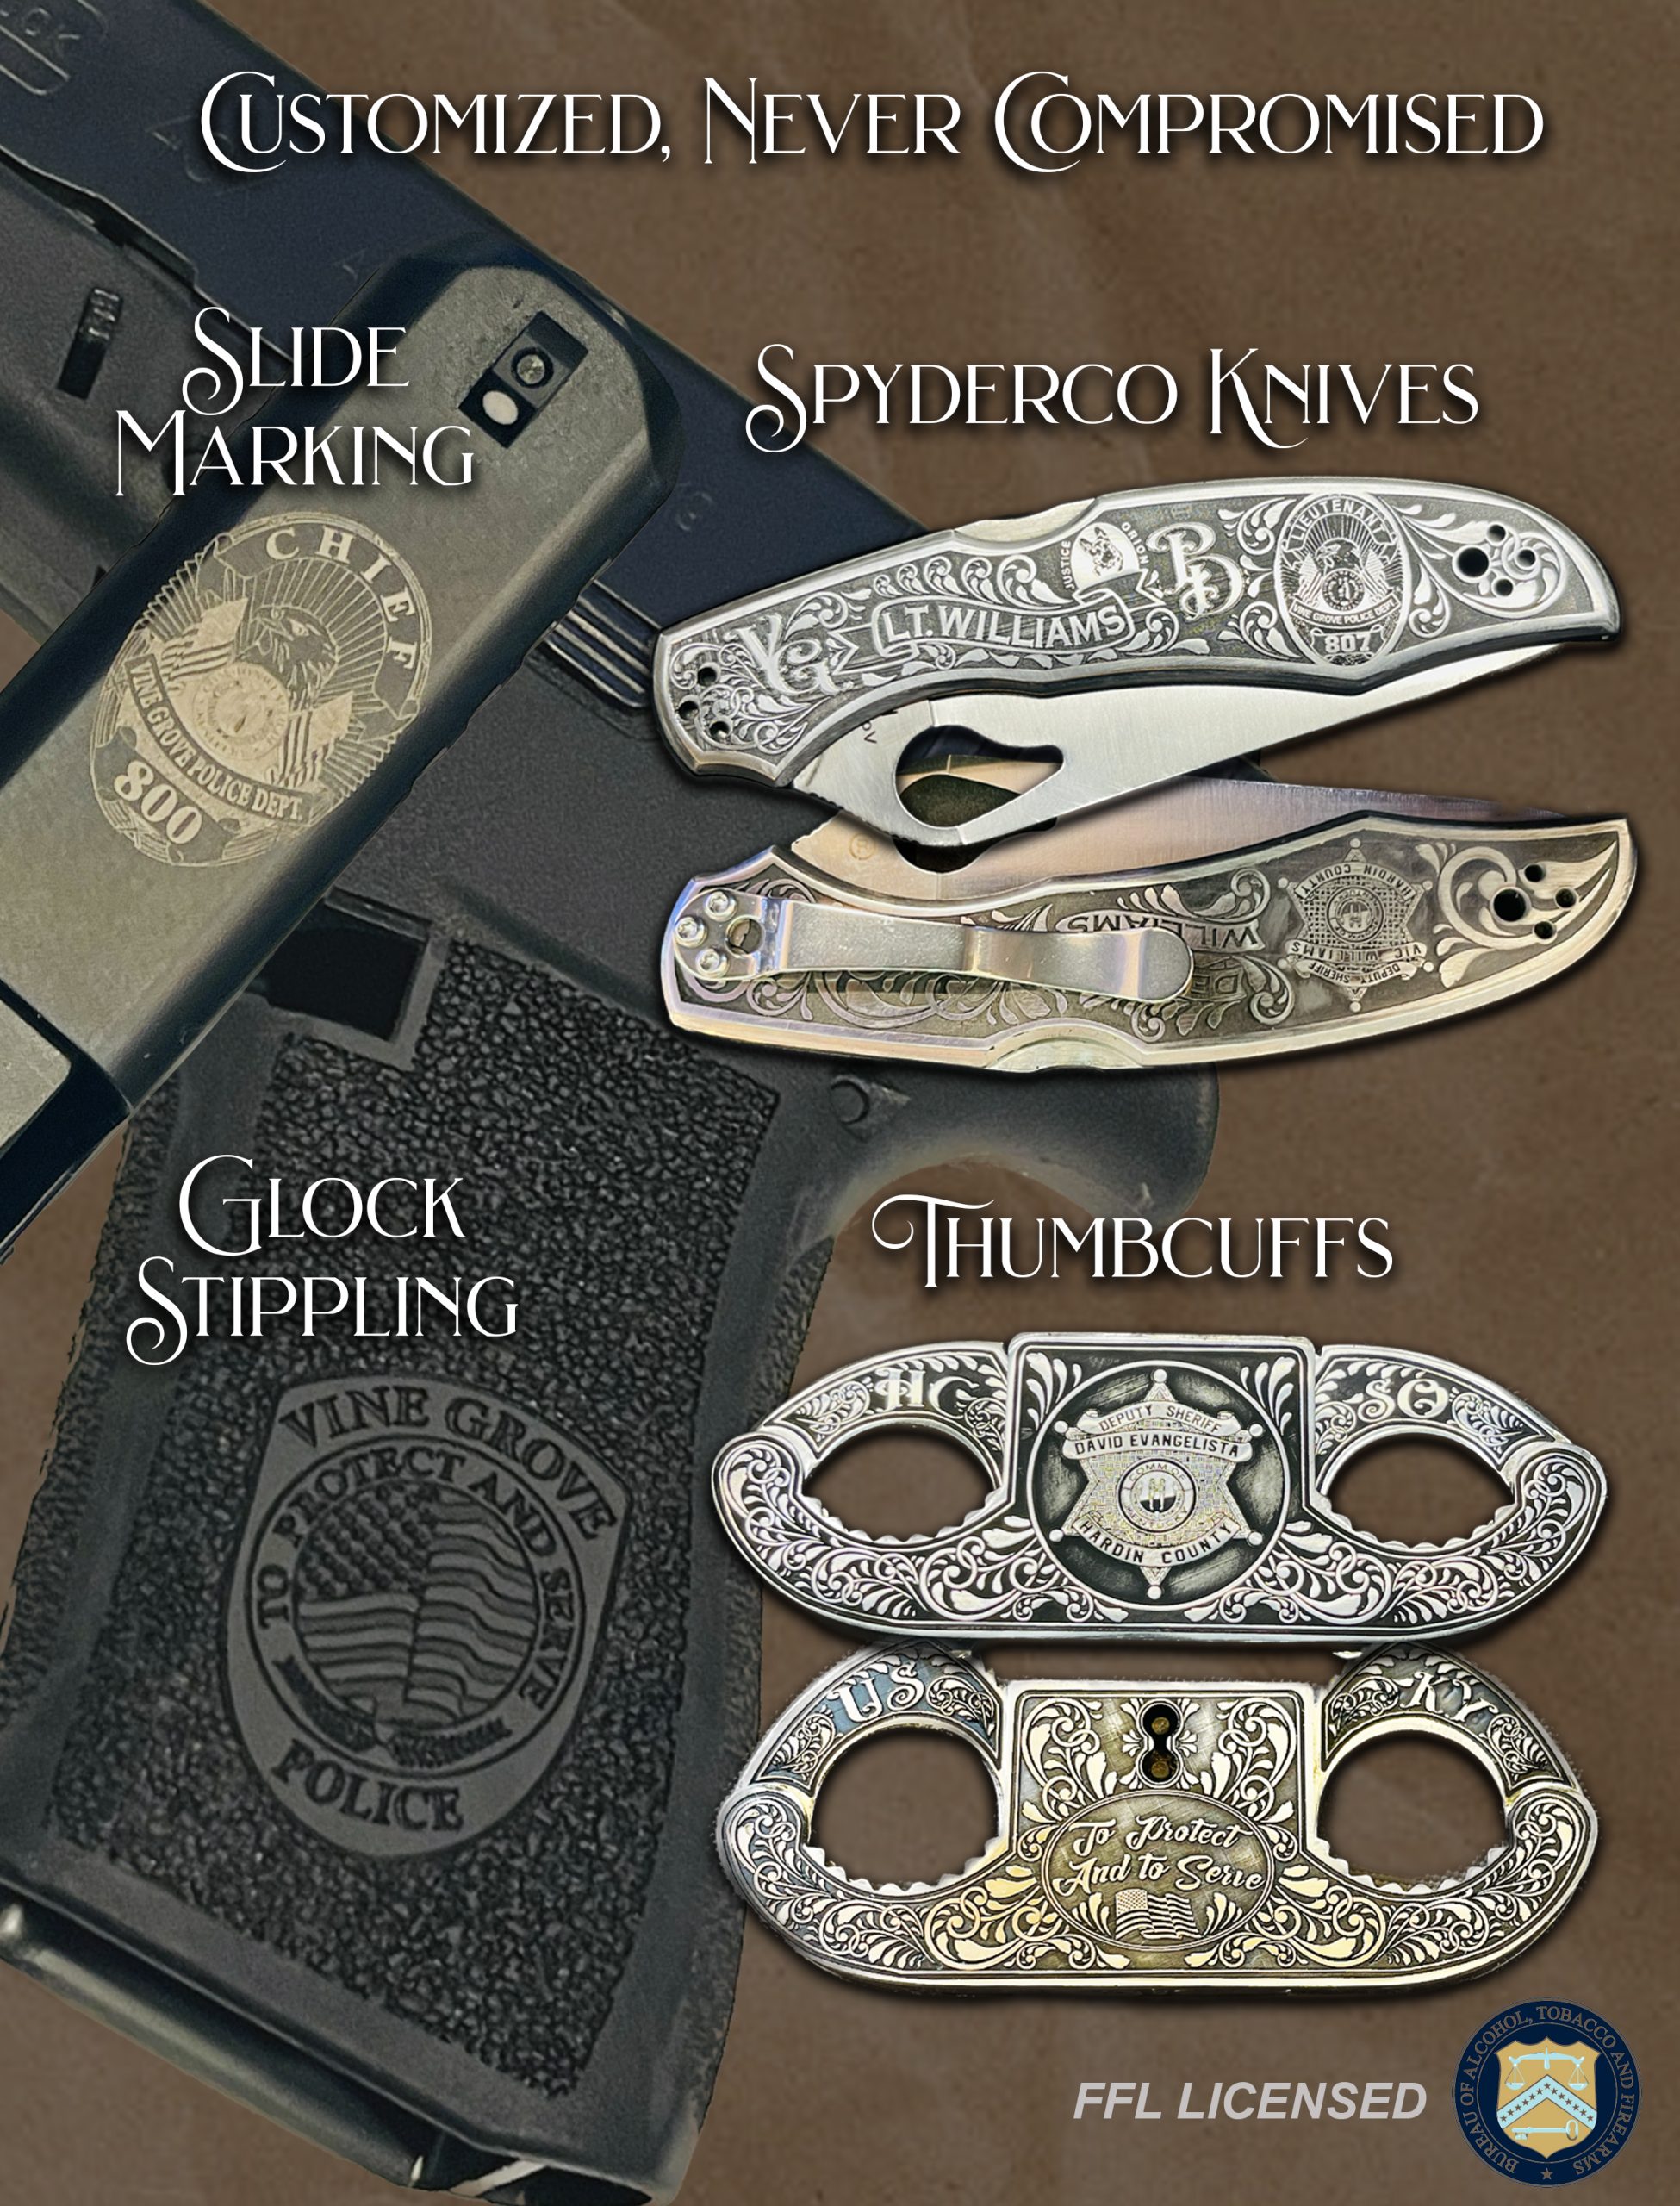 A collection of deep engraved products like a Knife, Thumb Cuffs, Handcuffs, and Stippling of a Glock Frame, annealed glock slide.